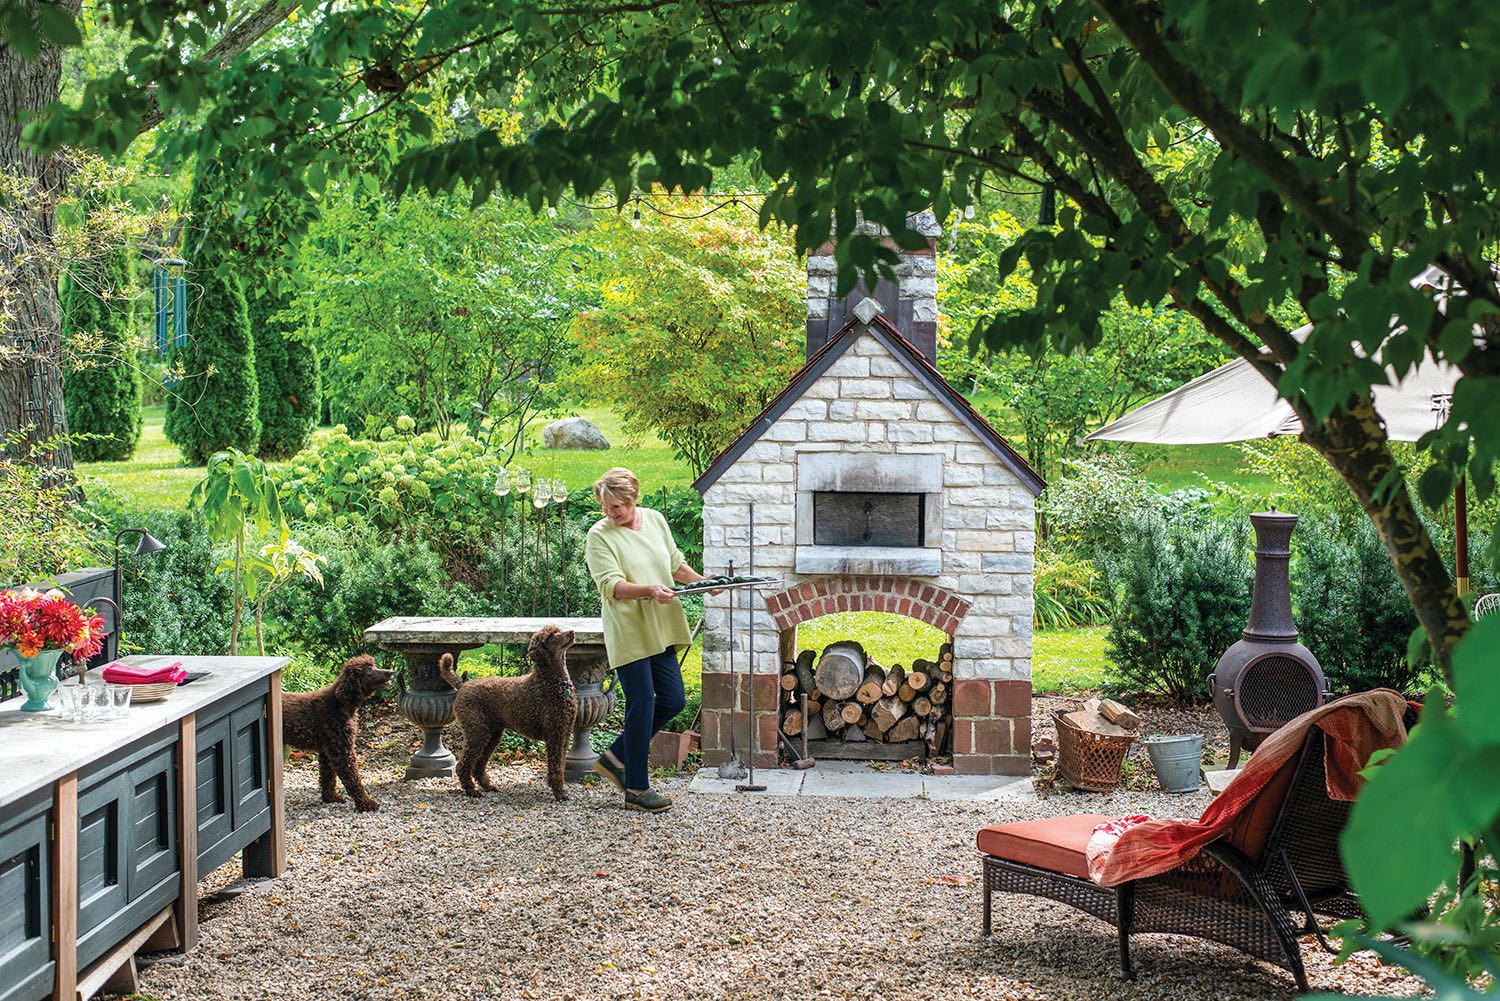 Maria with dogs in outdoor kitchen